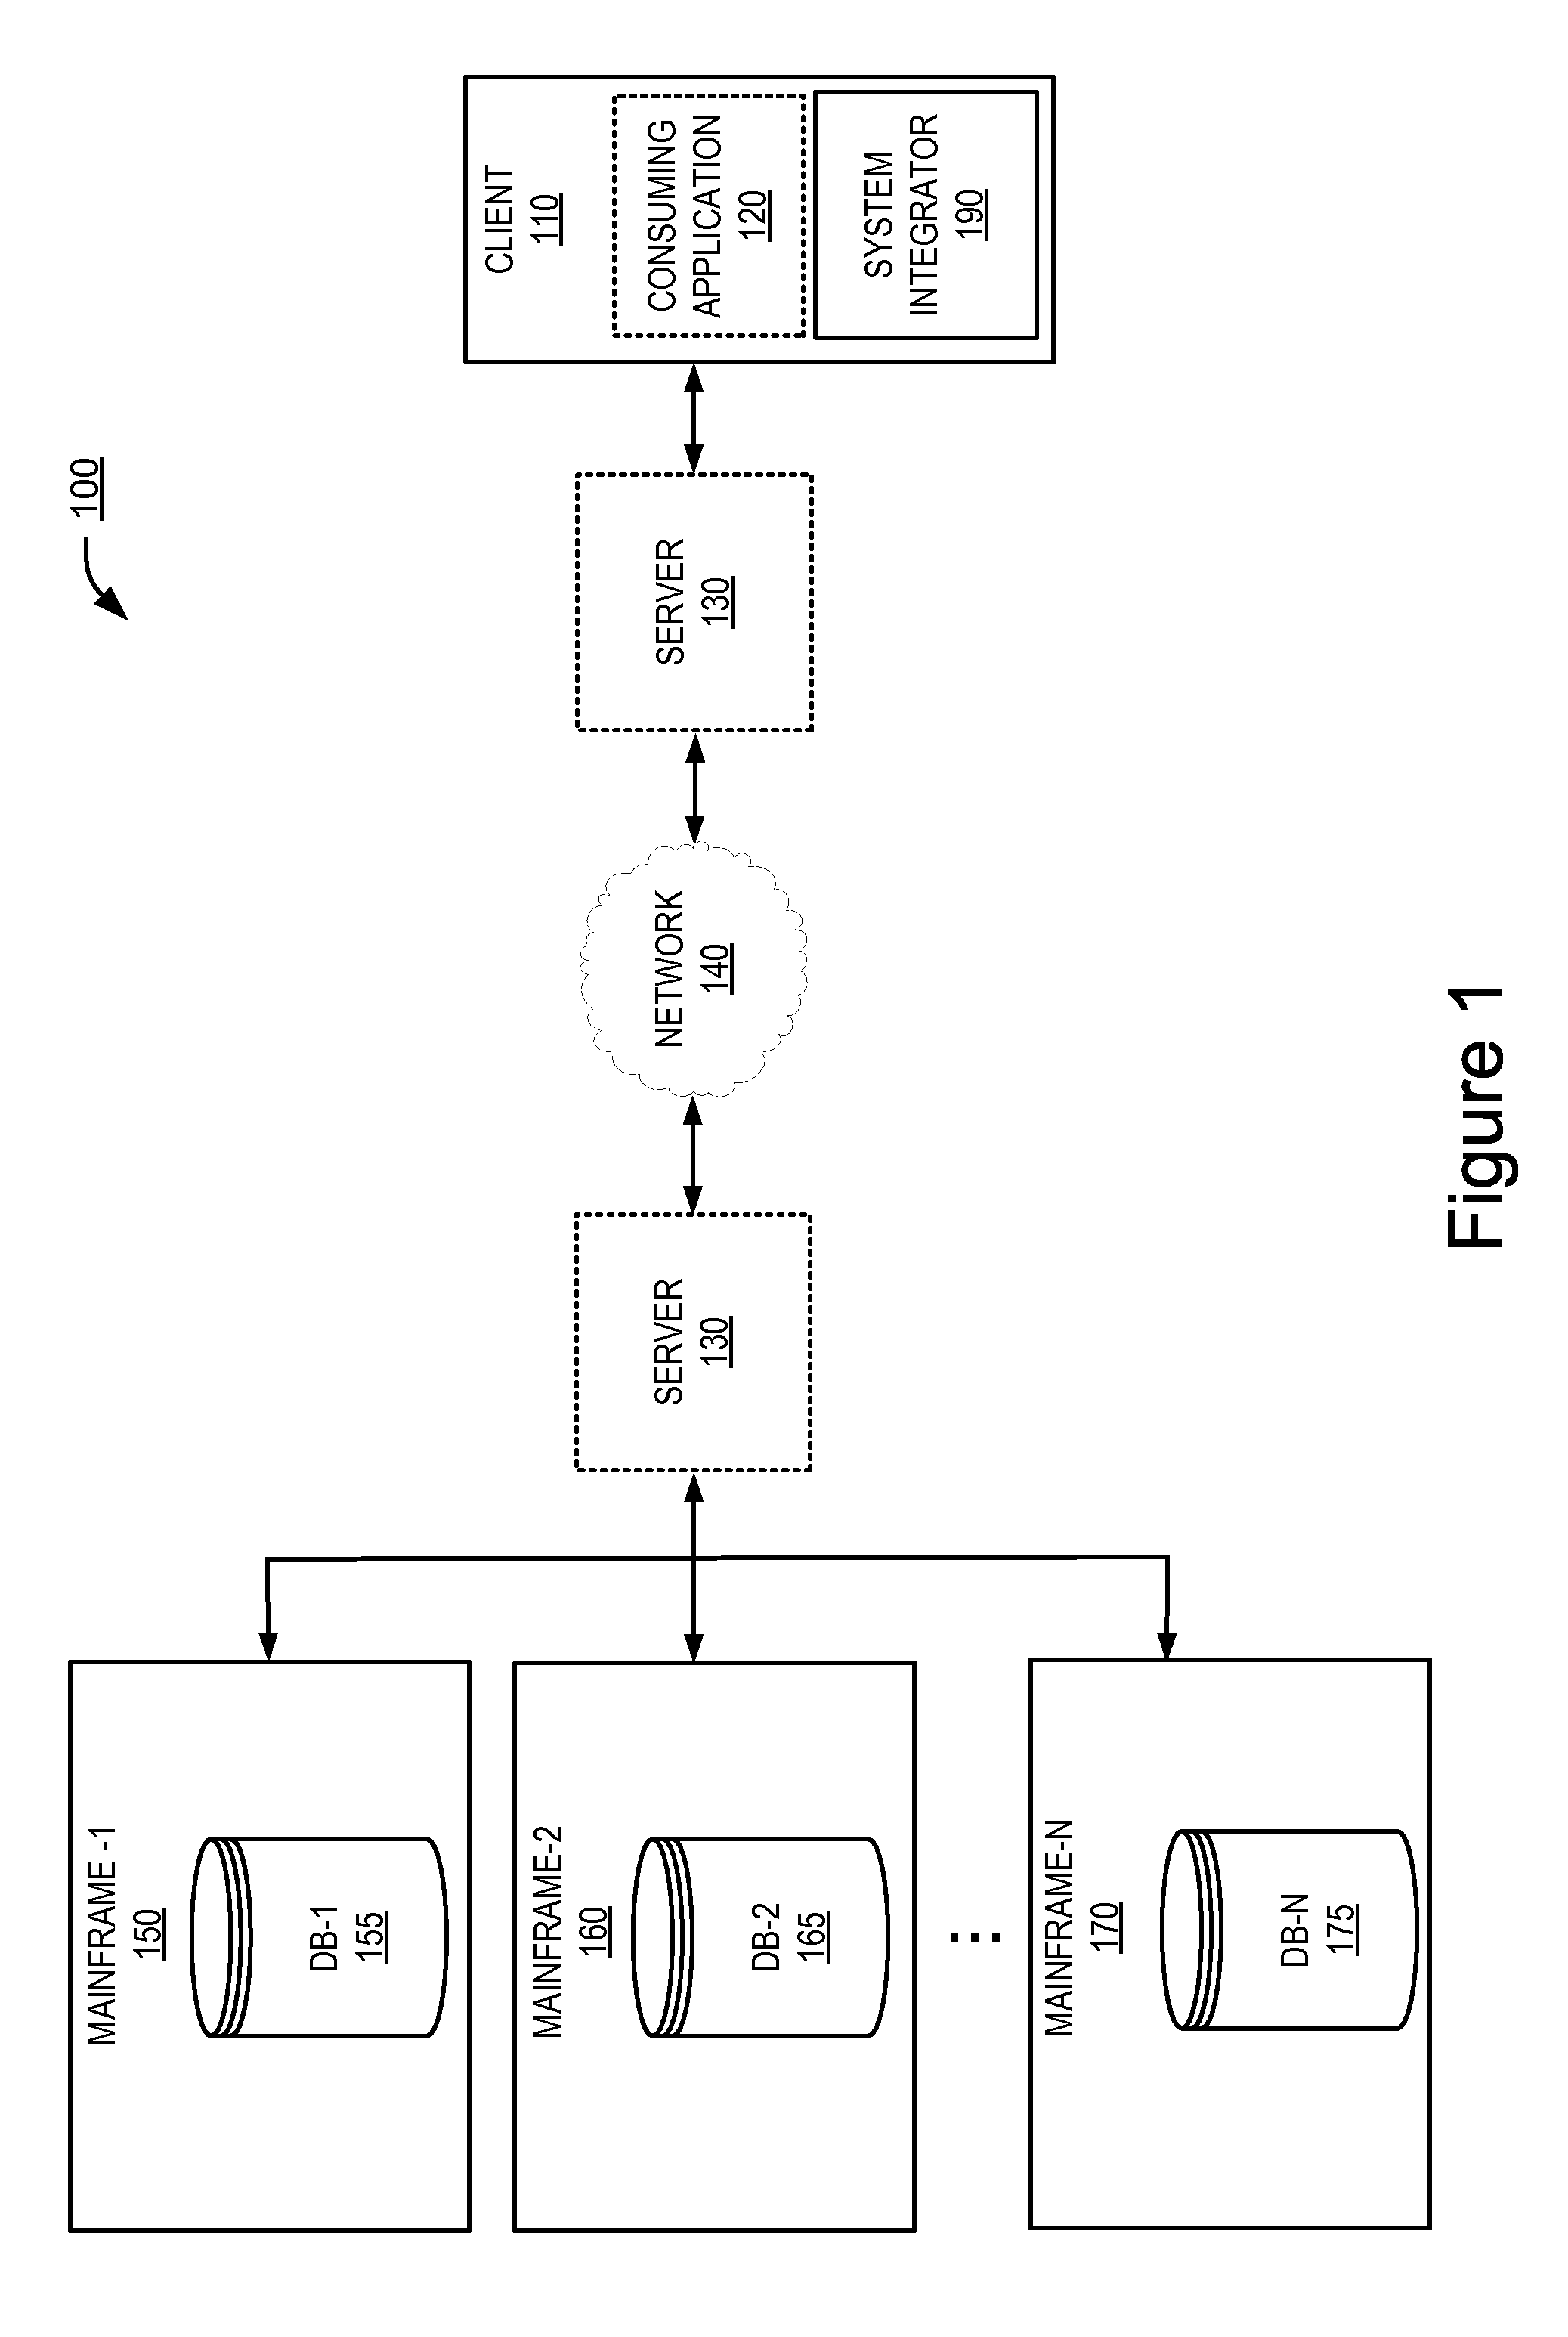 System integrator and method for mapping dynamic COBOL constructs to object instances for the automatic integration to object-oriented computing systems